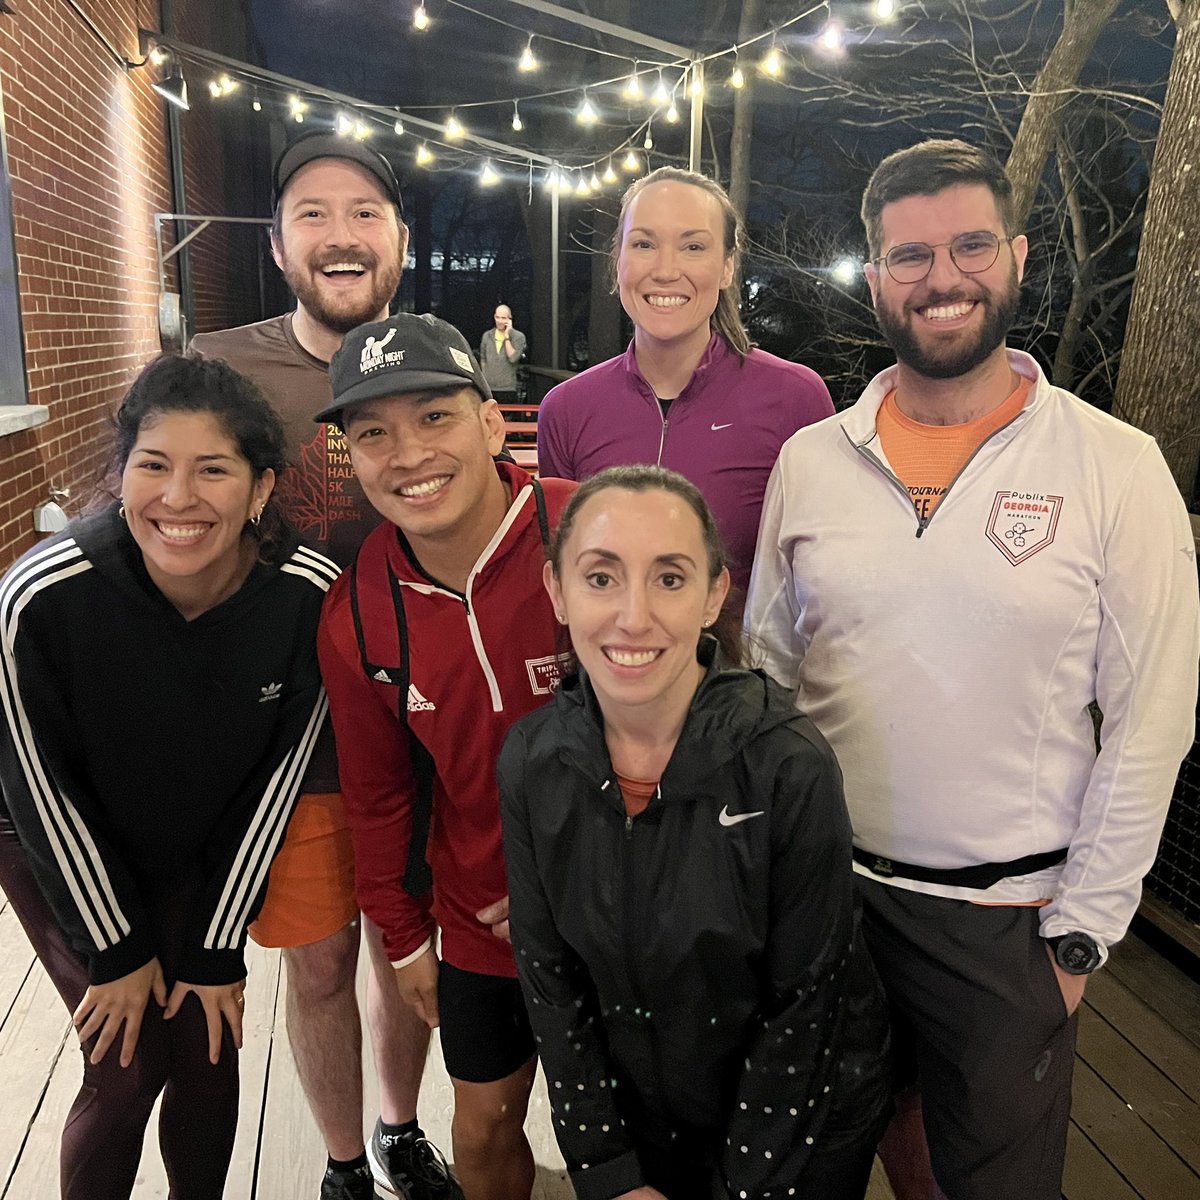 Join the Atlanta BeltLine Partnership & @ATLtrackclub for our weekly run club tomorrow at Westside Motor Lounge All paces and furry friends are welcome! No registration needed to join. Check-in at 6:15 pm, run starts at 6:30 pm Location: 725 Echo St NW Atlanta, GA